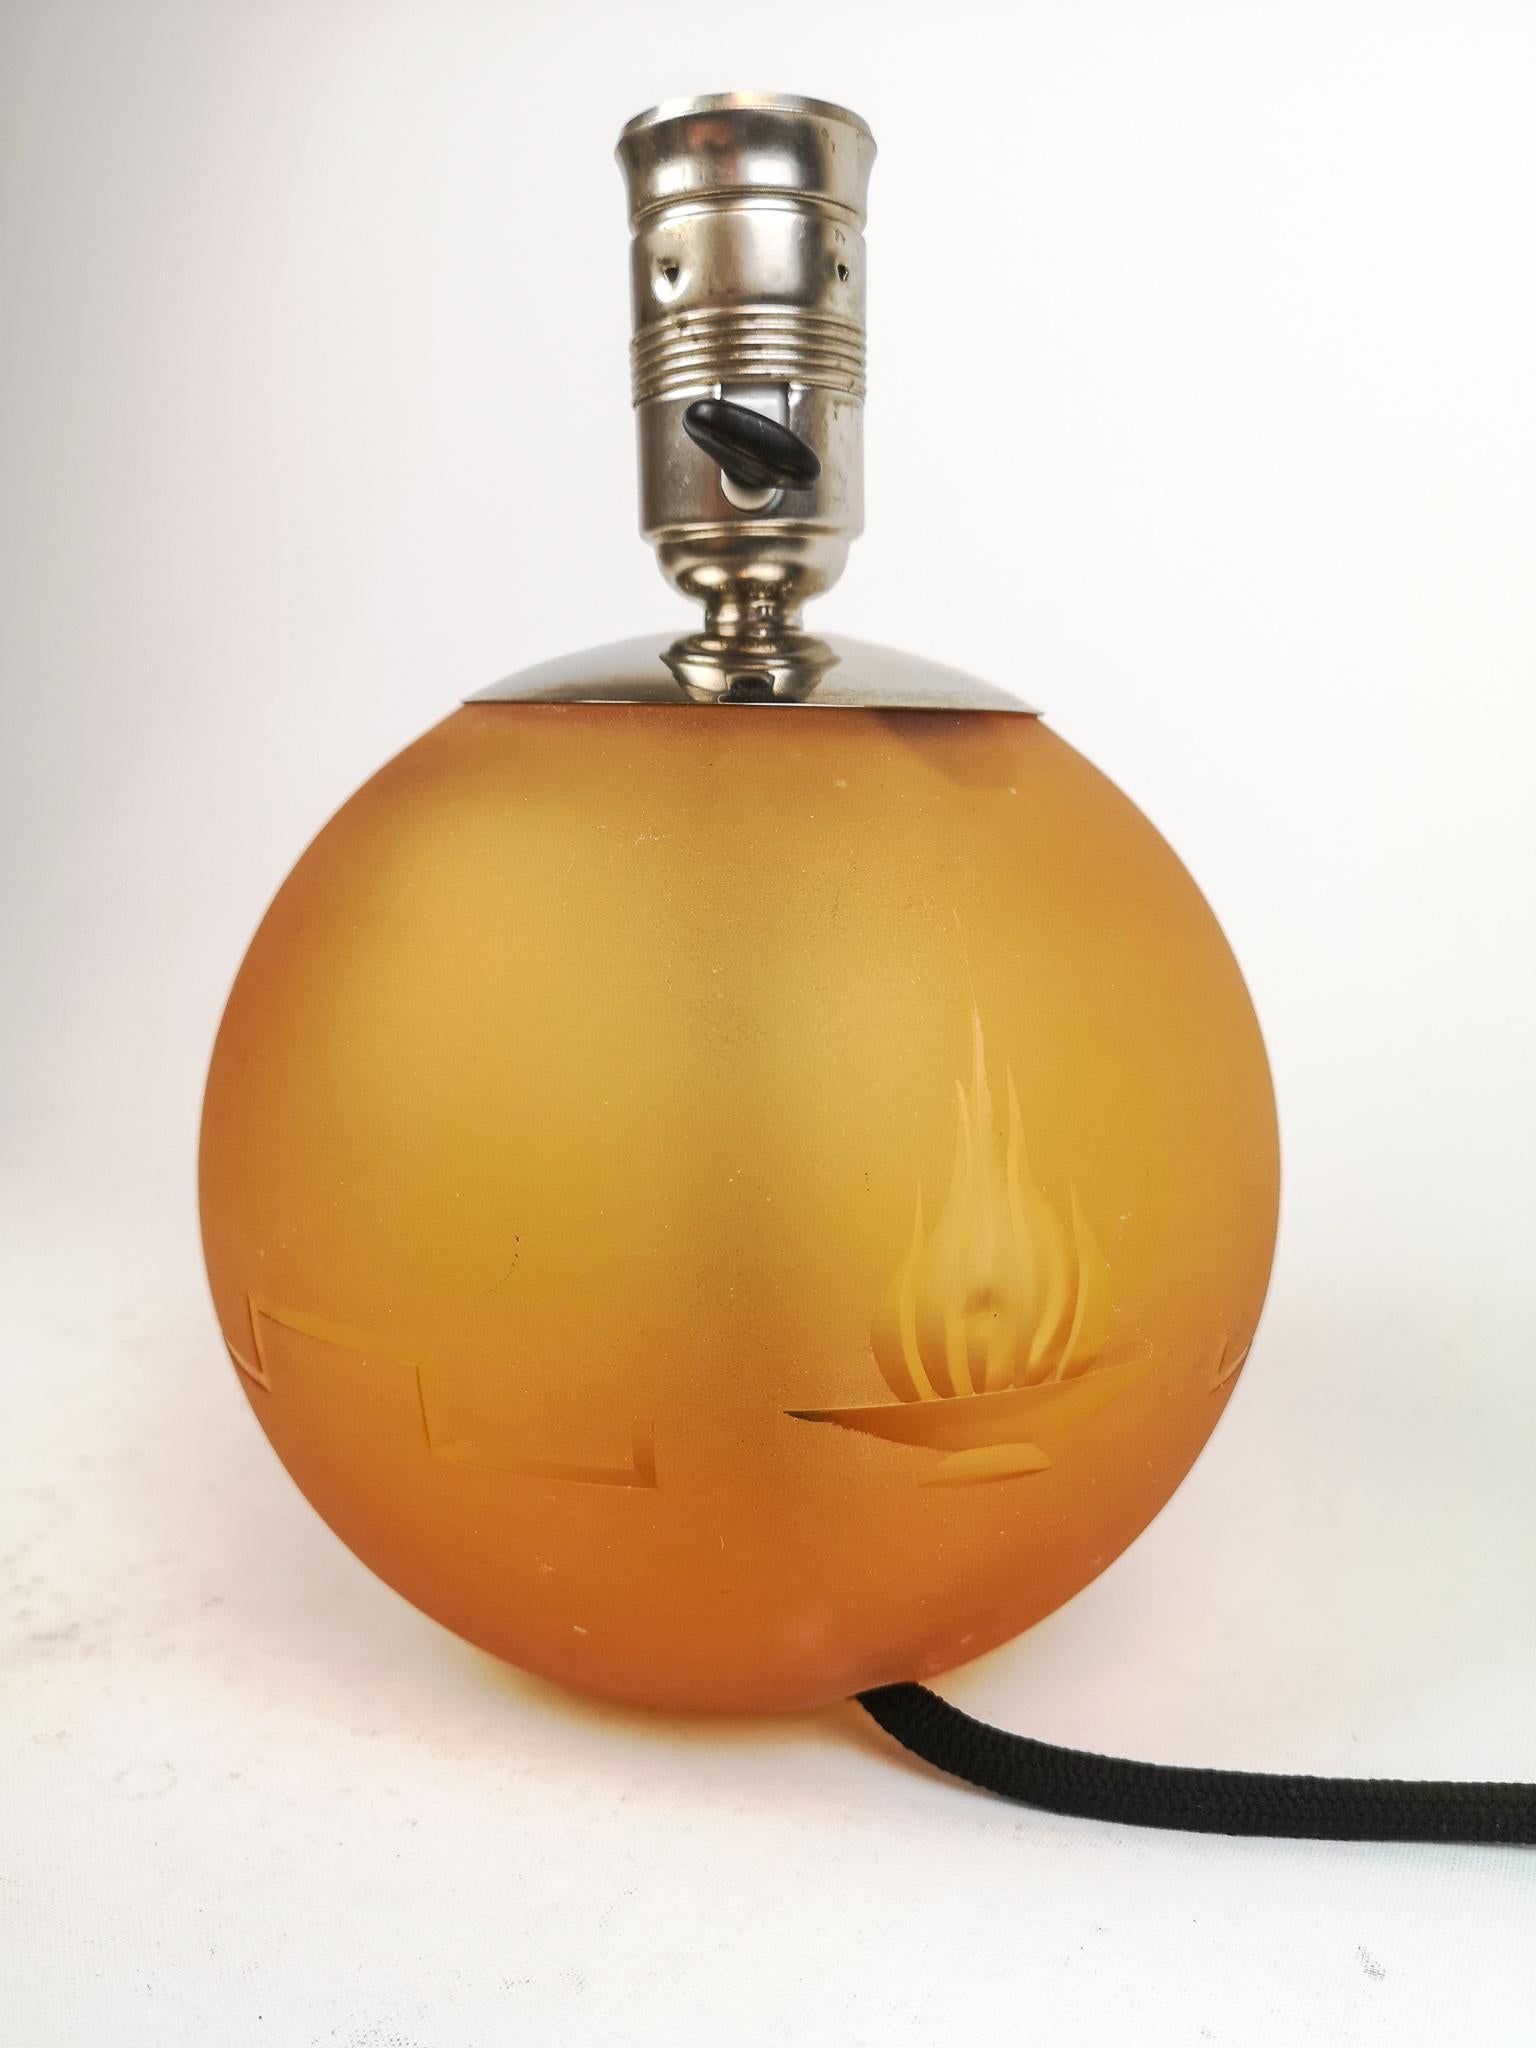 Art Deco table lamp made in art glass and a top of chrome, Sweden, 1930s

Nice looking table lamp in Art Deco style from the period of 1930s. Typical art glass with exceptional color and carved art deco pattern.

Good vintage condition. New